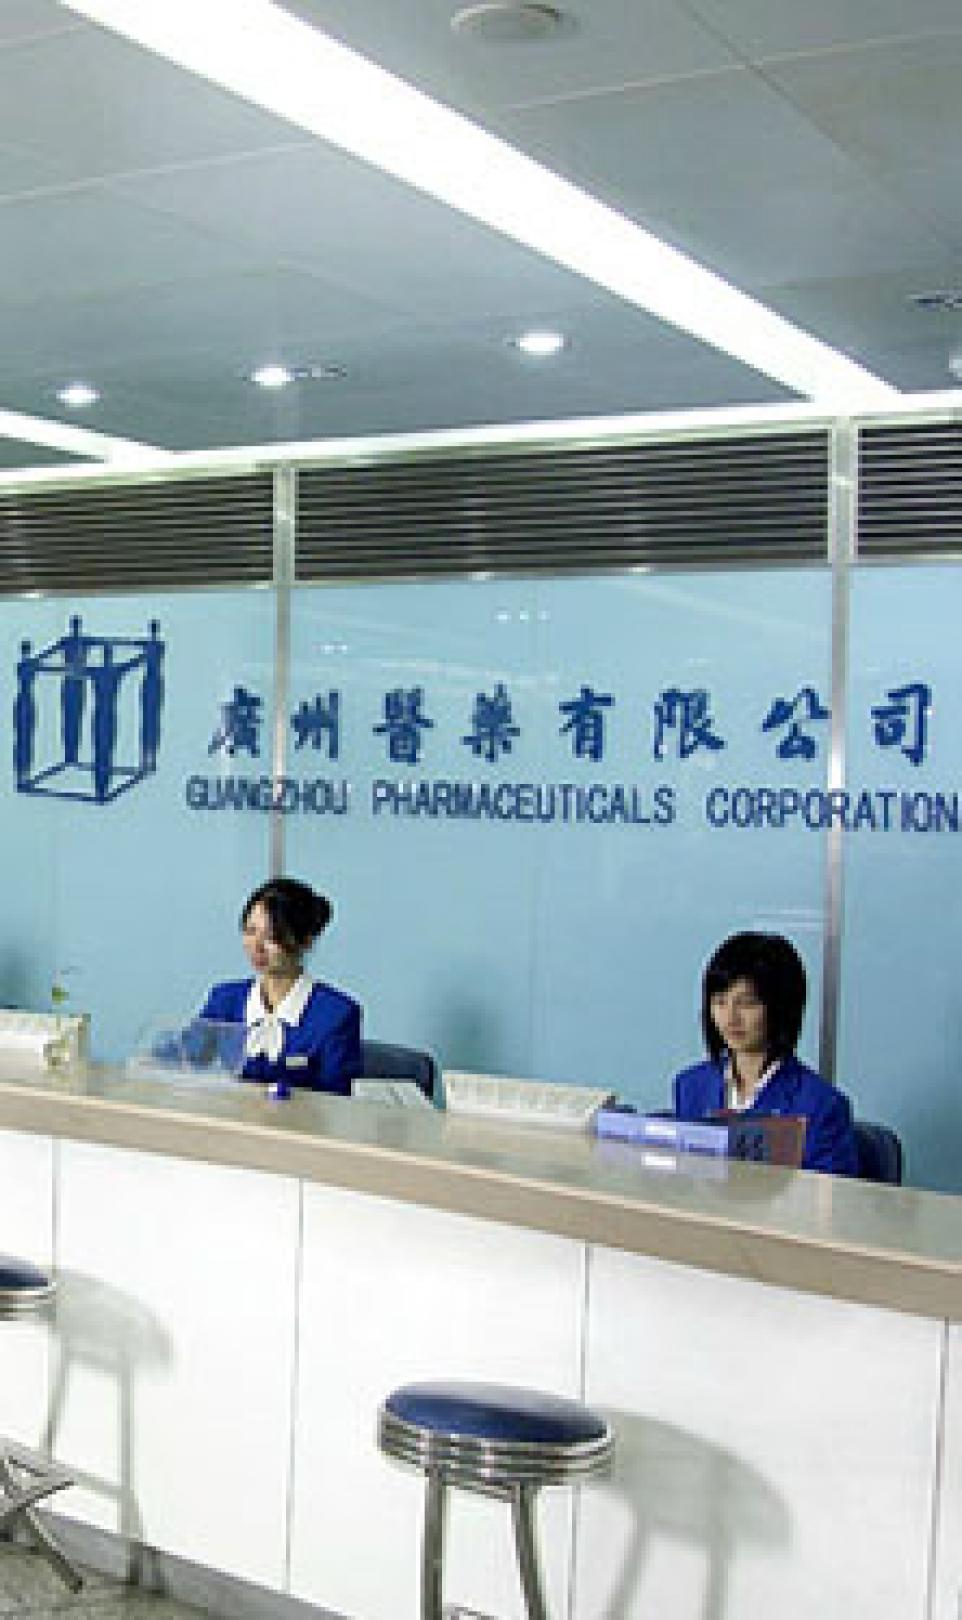 Two female receptionists in blue uniforms, pictured in the reception area of the Guangzhou Pharmaceuticals Corporation